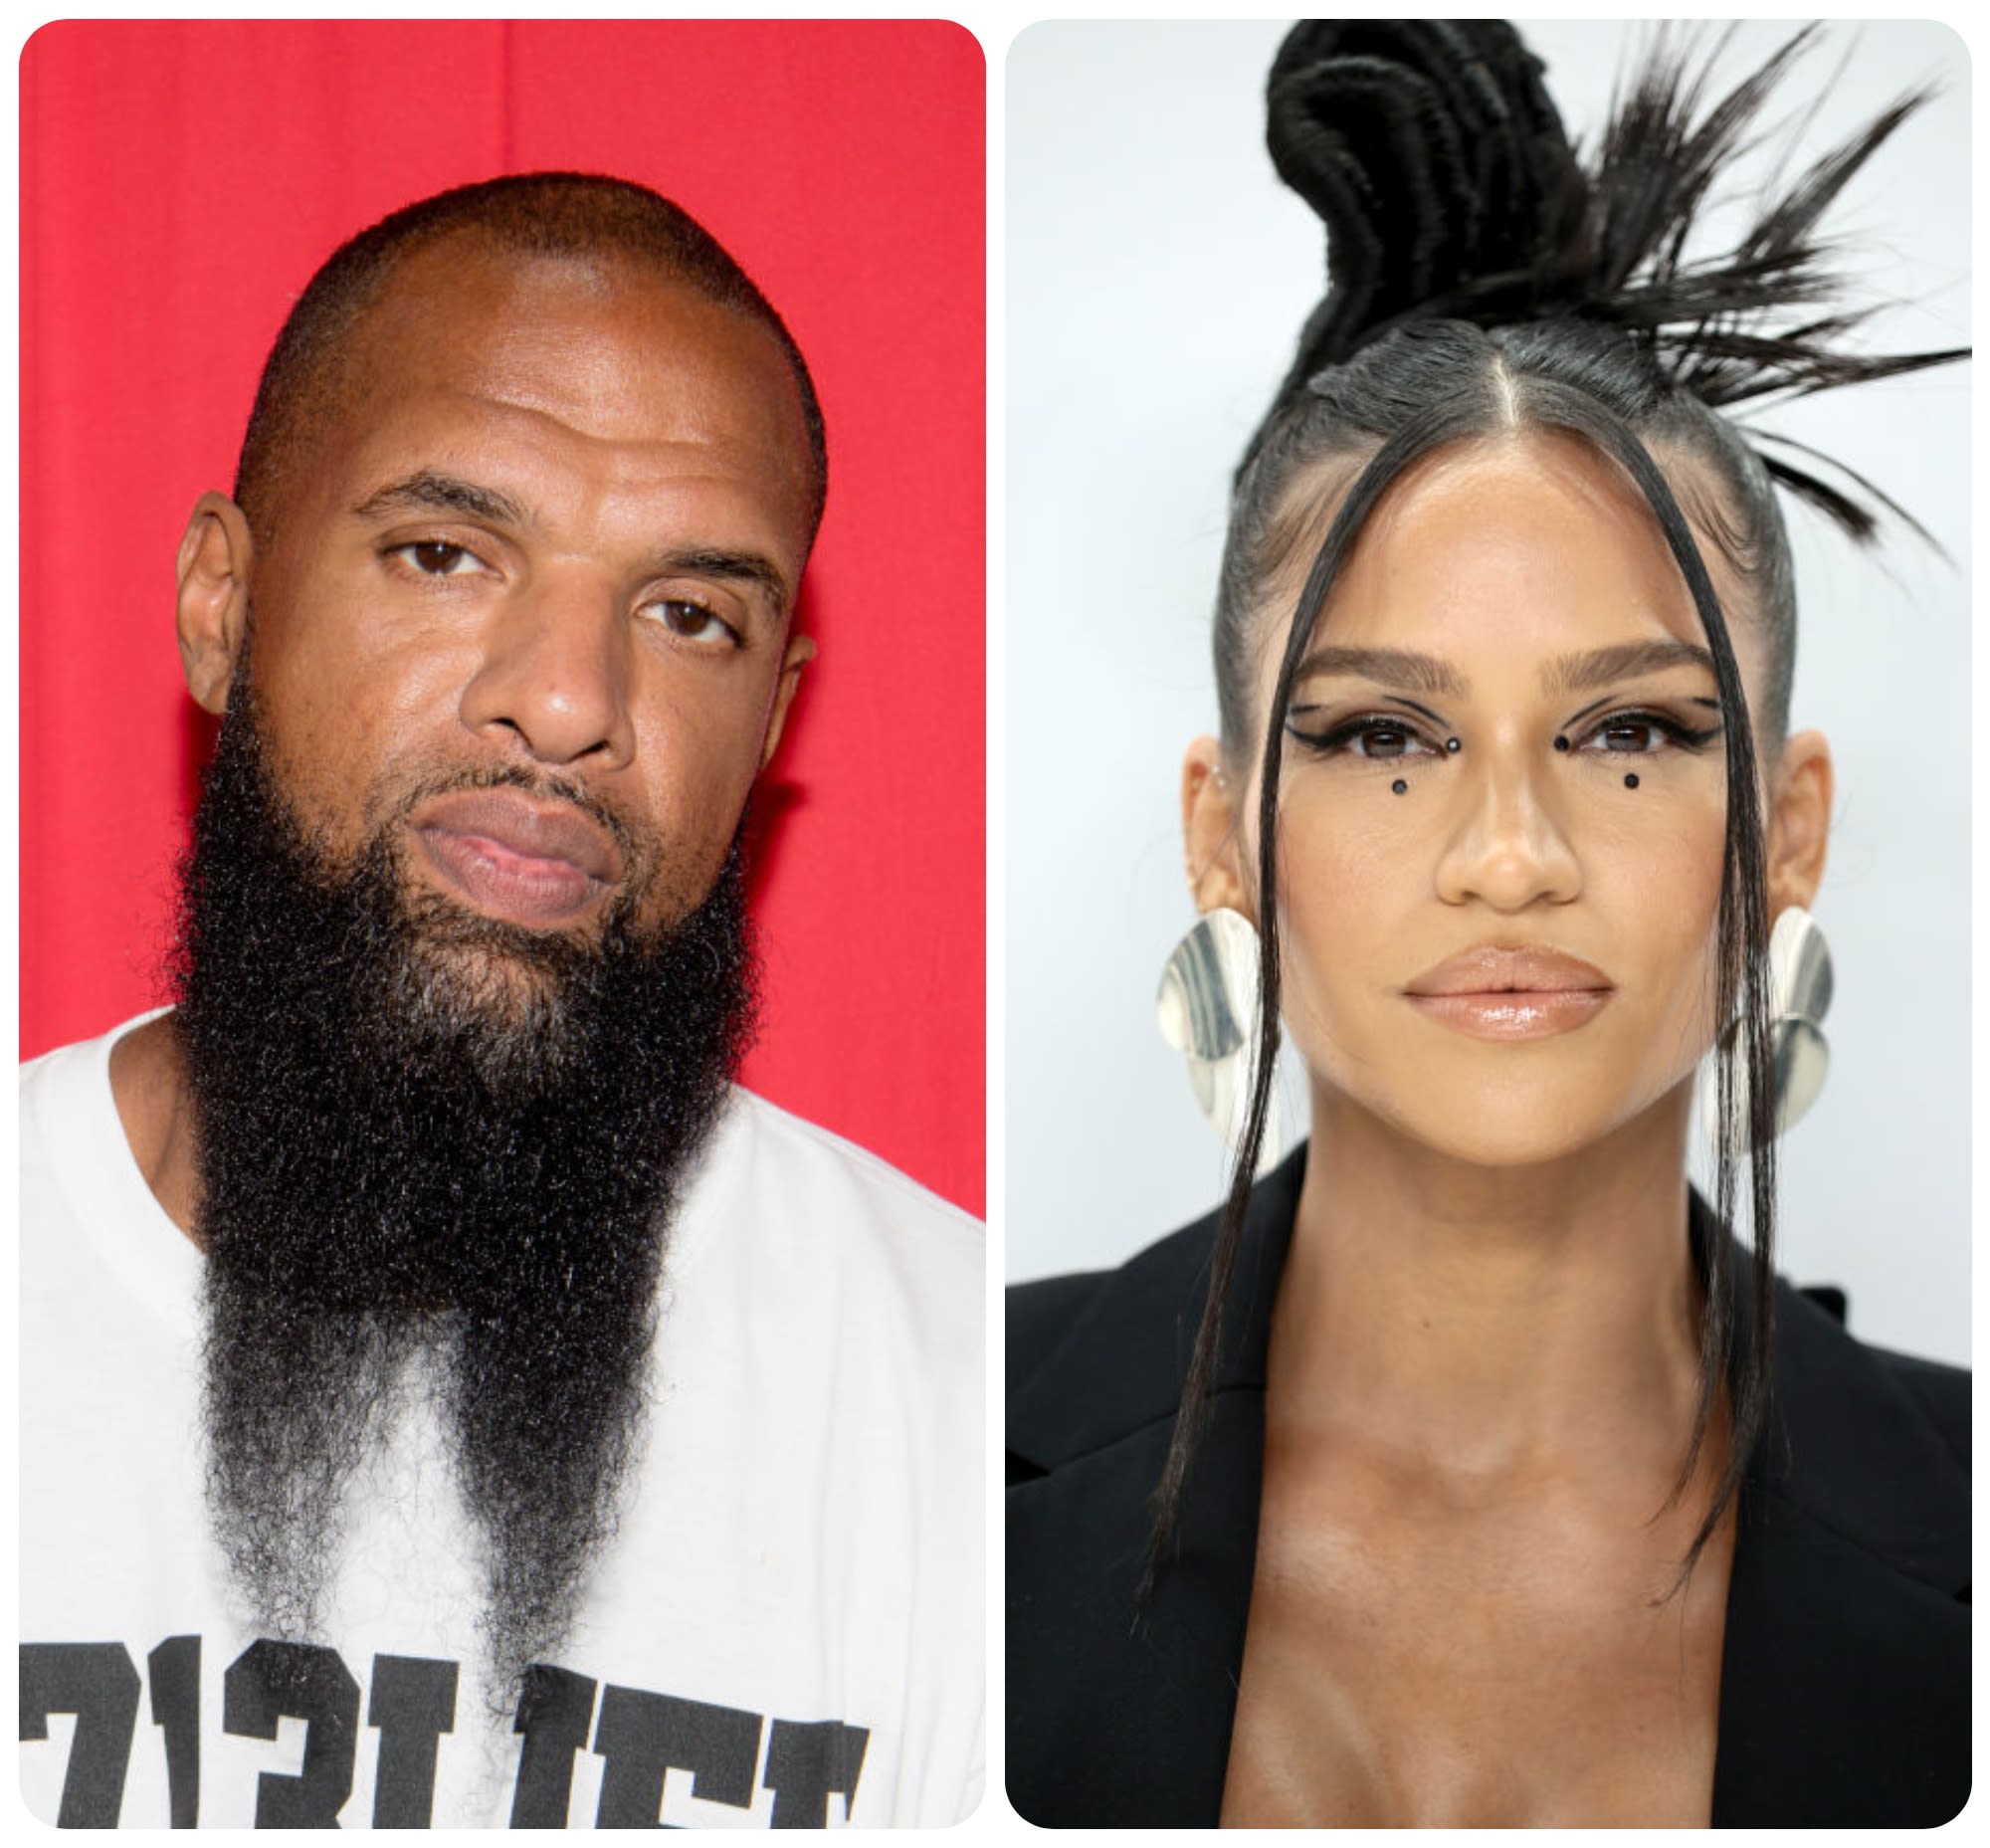 So Sorry: Slim Thug Apologizes To Cassie For Not Believing Her Amid Release Of Diddy Abuse Video --'I'll Take This L'